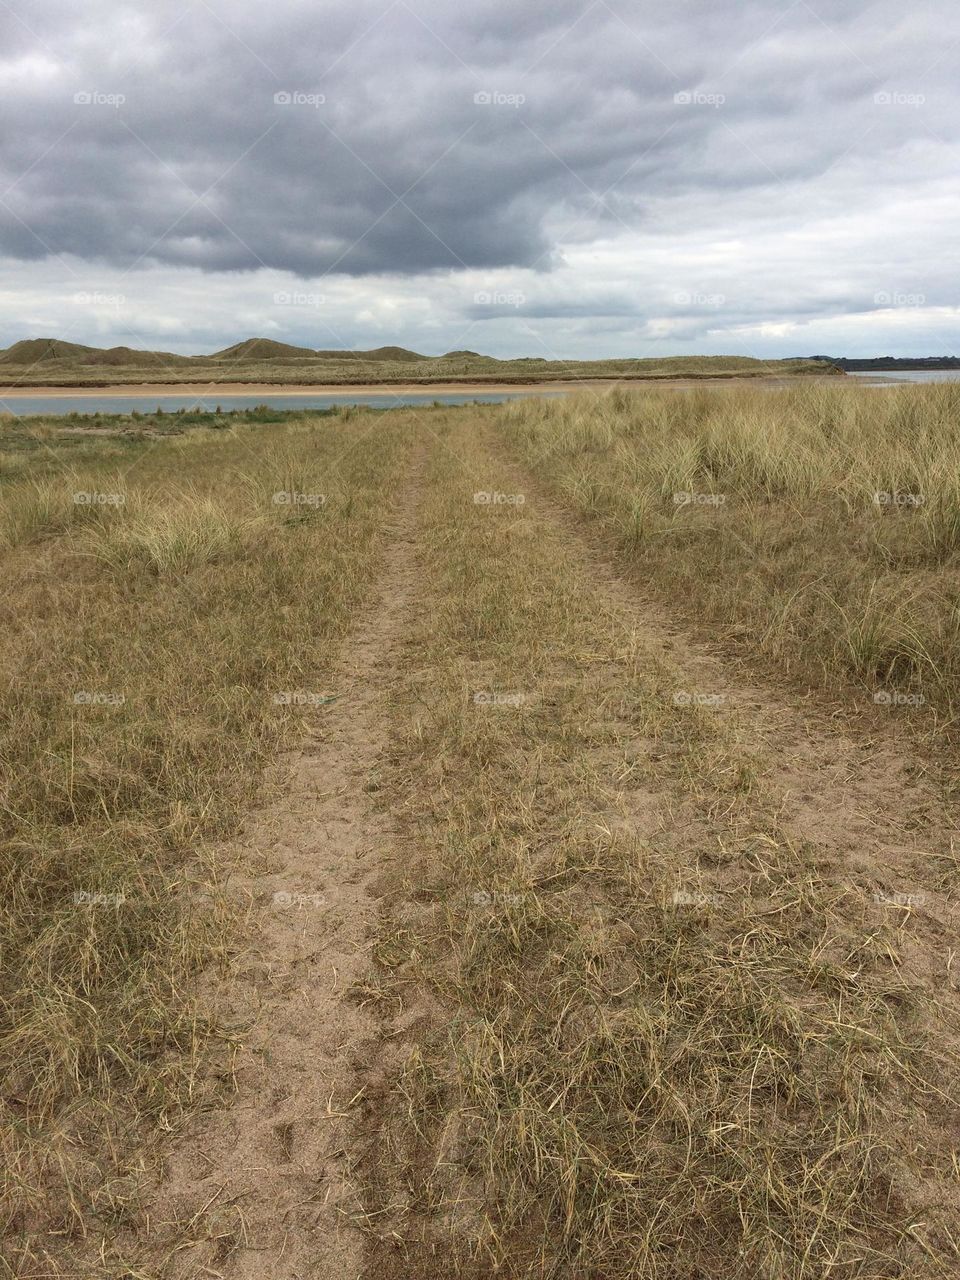 Trackway across a grass-covered sandy beach towards an inlet with tall dunes in the background